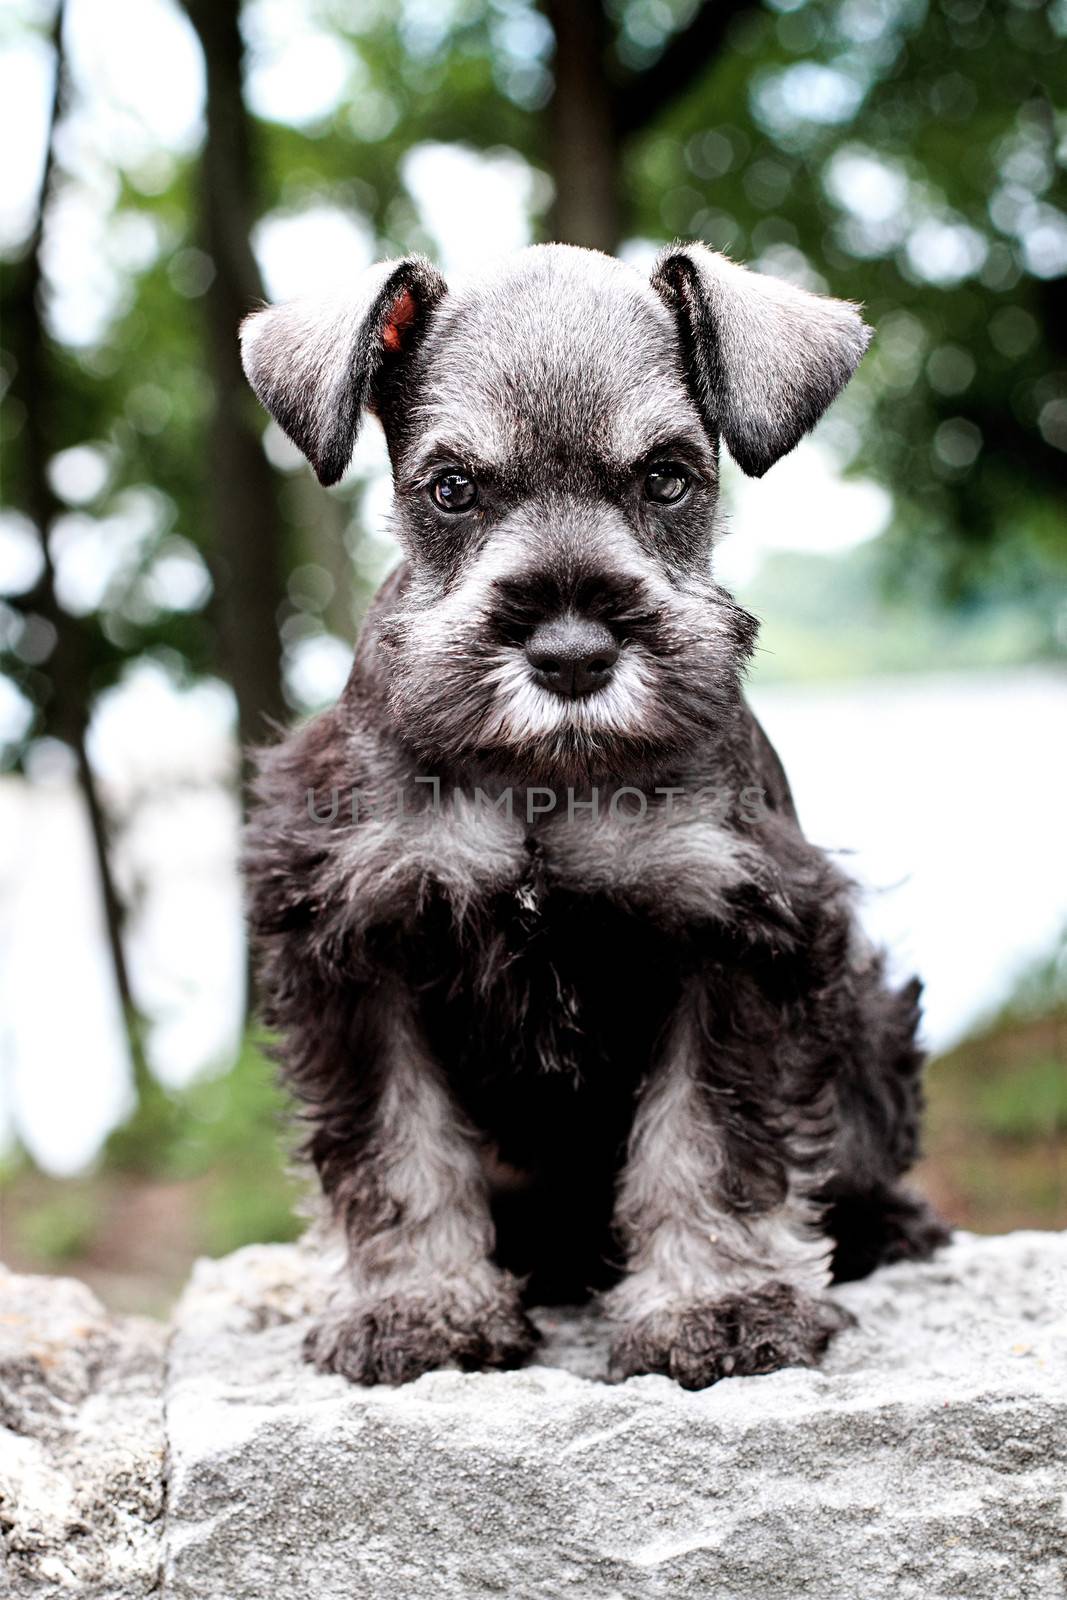 Six week old salt and pepper Mini Schnauzer sitting outside. Extreme shallow depth of field with selective focus on puppies face.